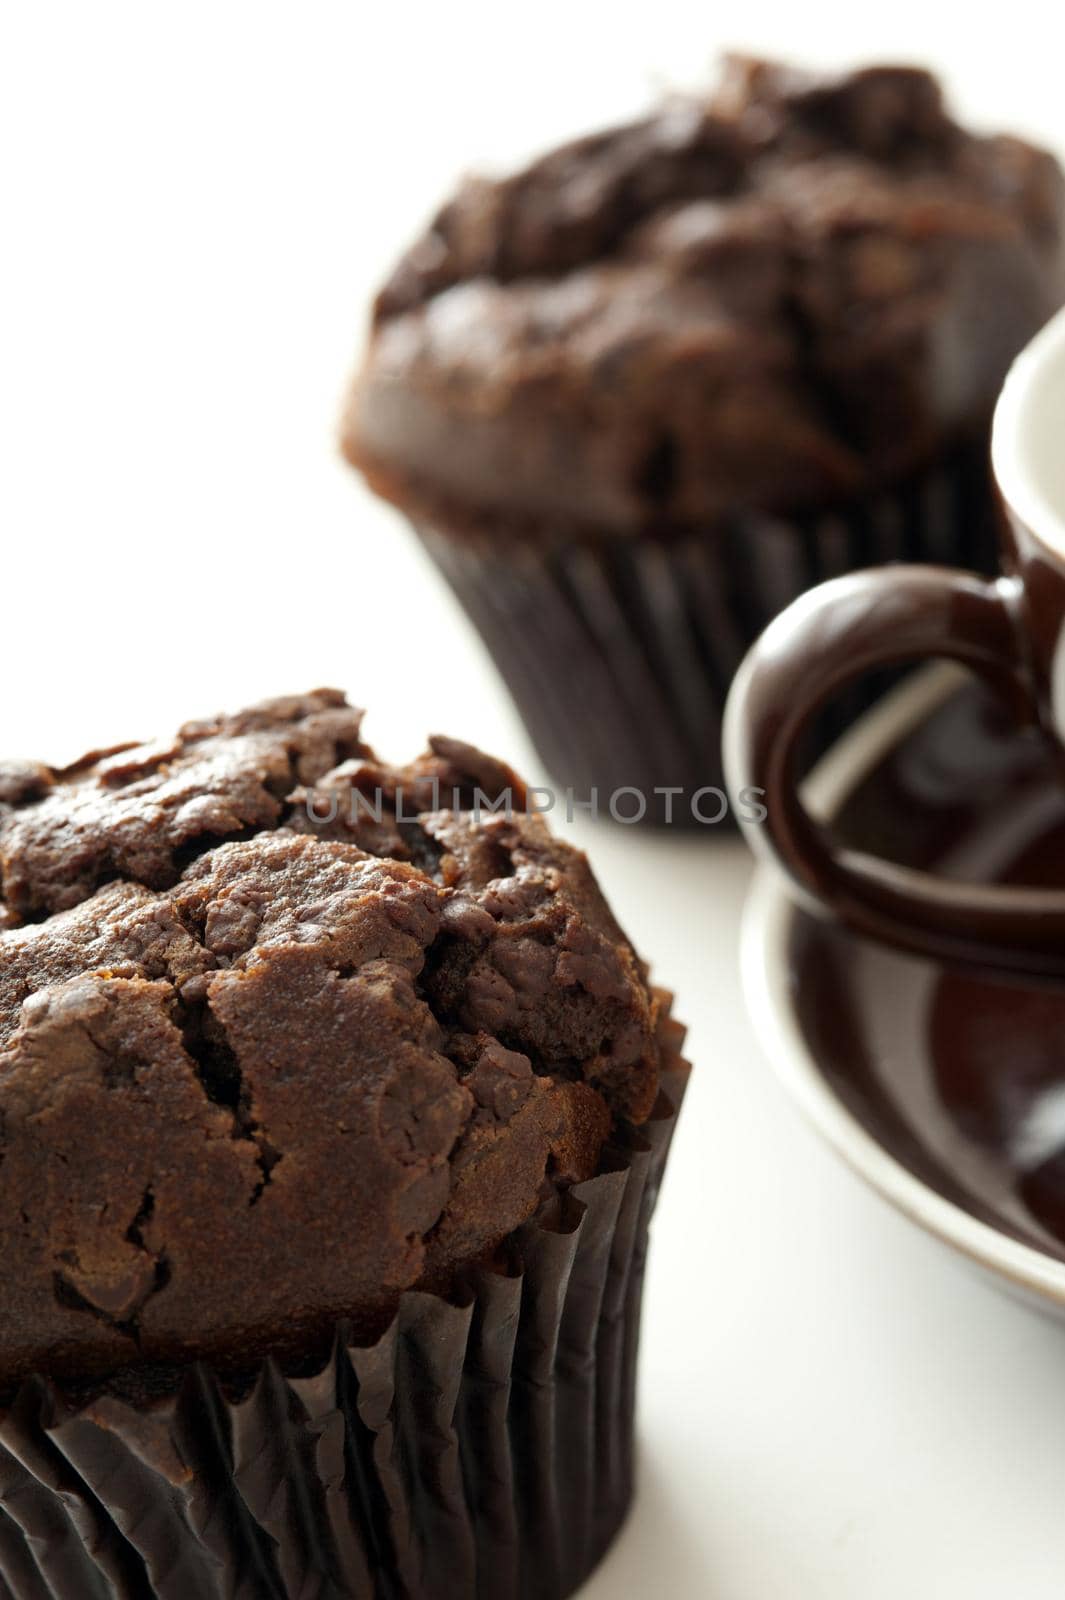 Dark brown freshly baked chocolate muffin served with a cup of tea of coffee, close up partial views of the cookie and cup